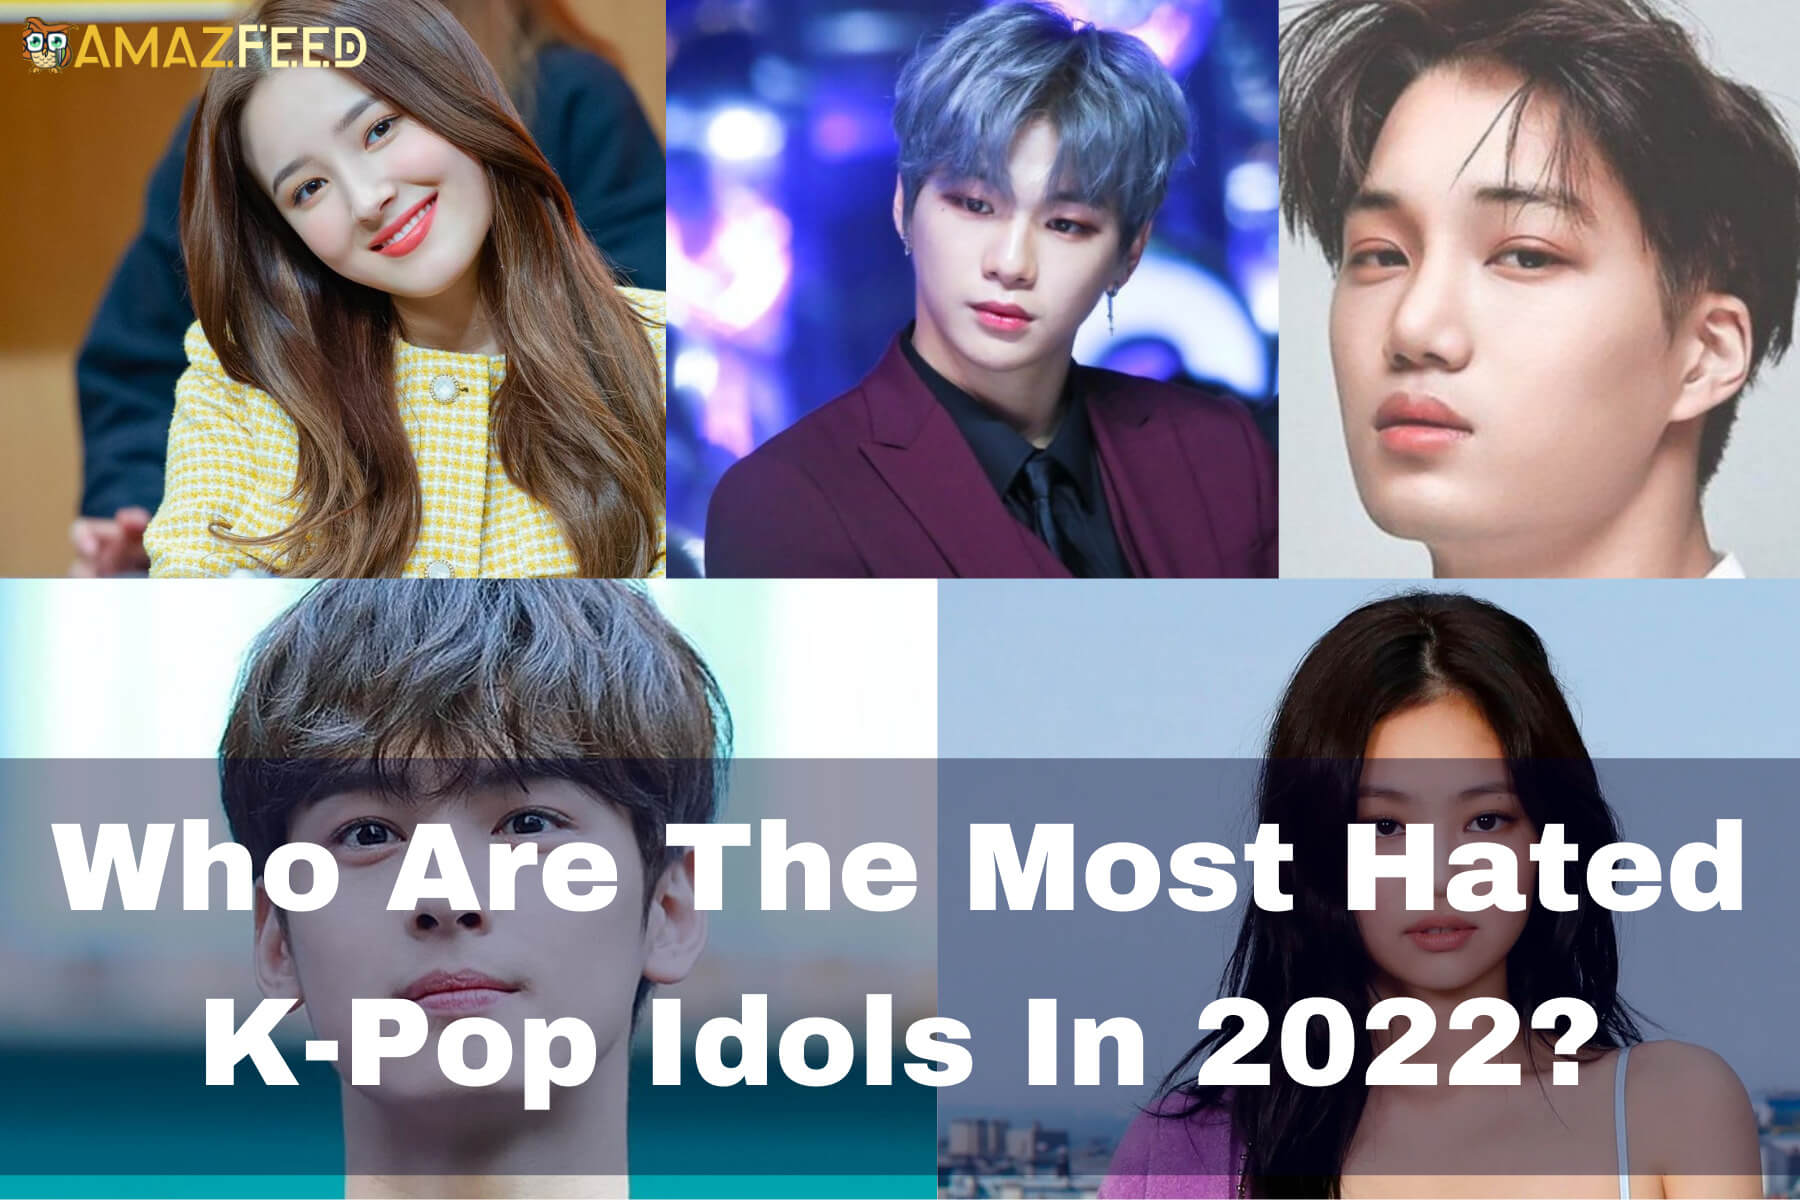 Who Are The Most Hated K-Pop Idols In 2022